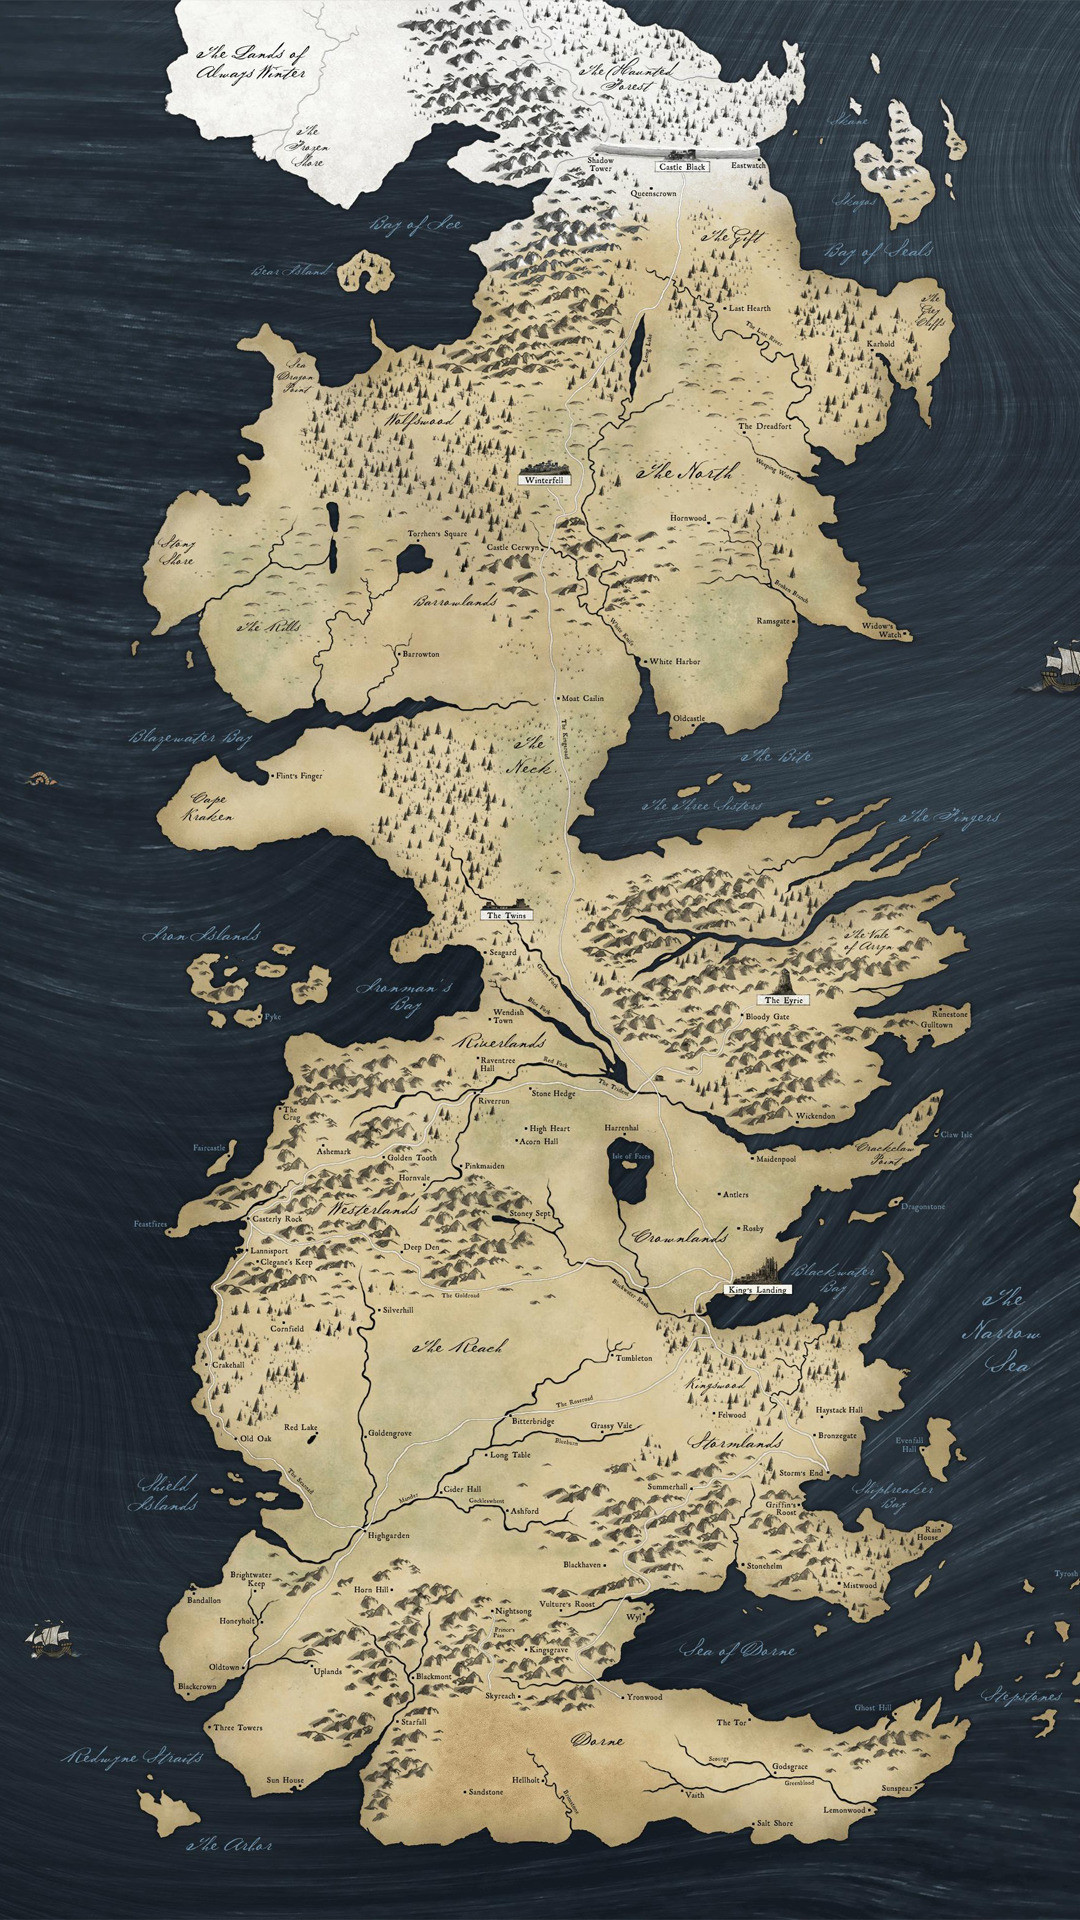 Game of Thrones map Wallpaper